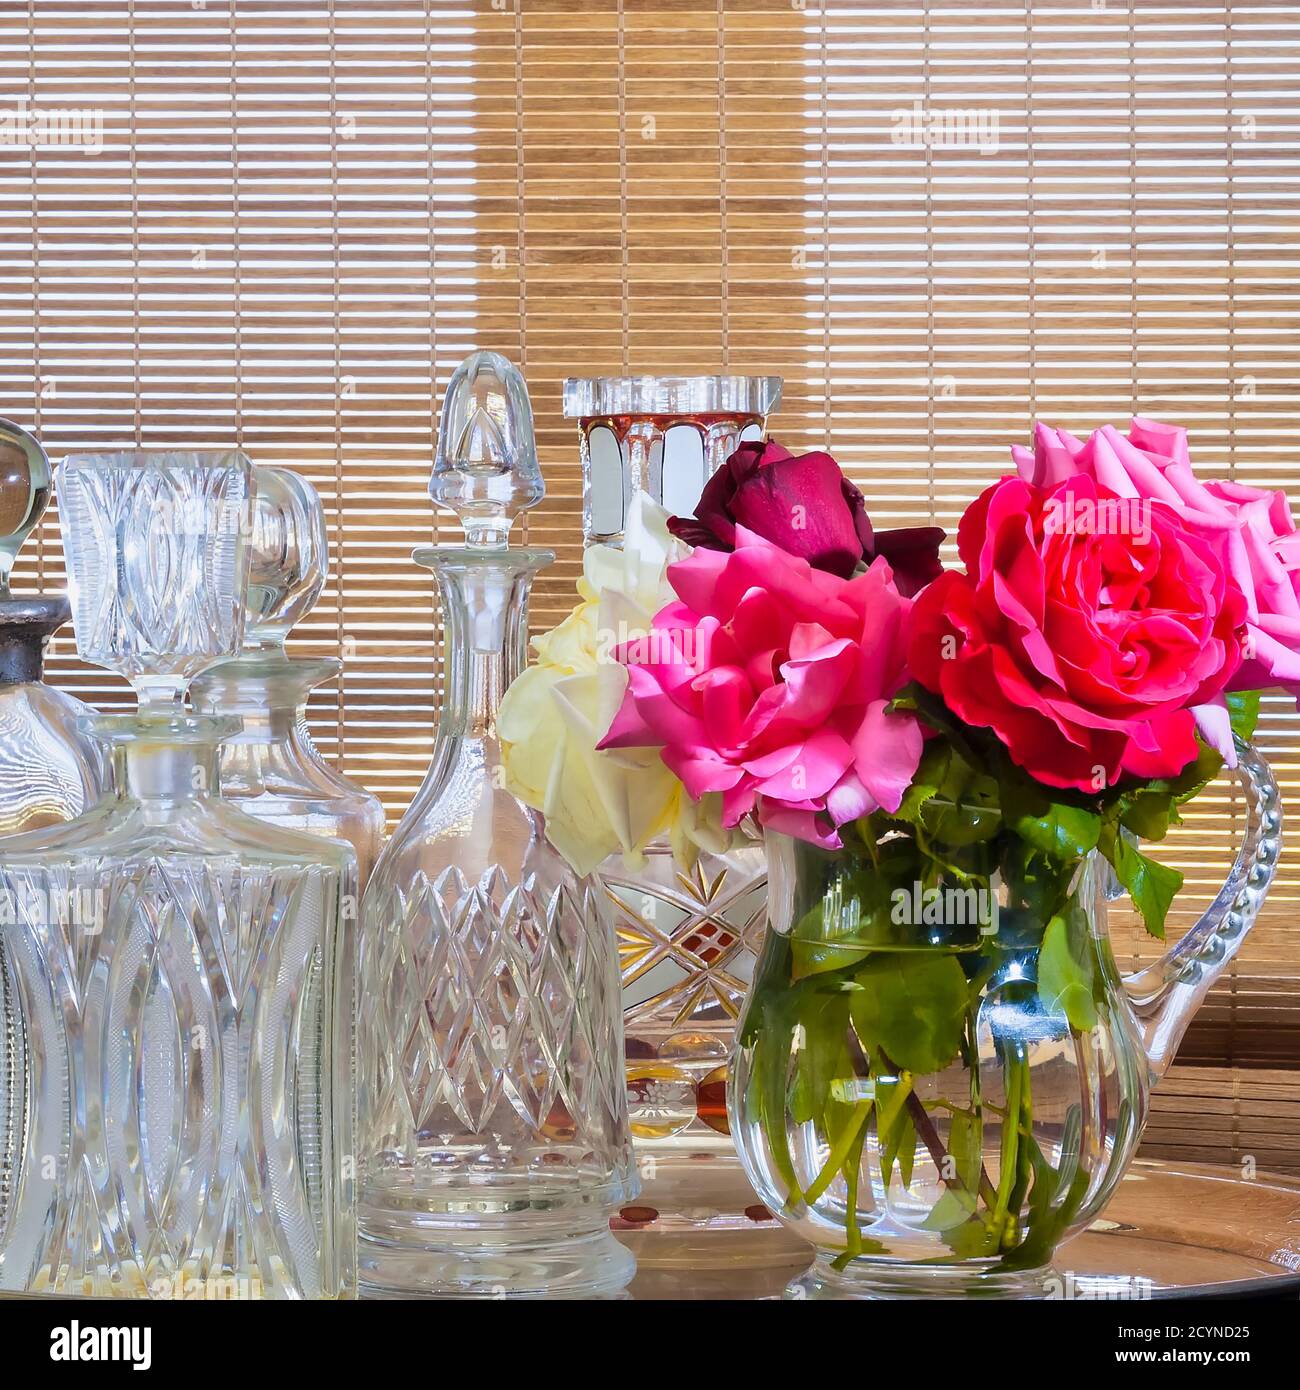 Pink flower in a crystal water jug. Empty vintage crystal decanters on the left. Stock Image Stock Photo